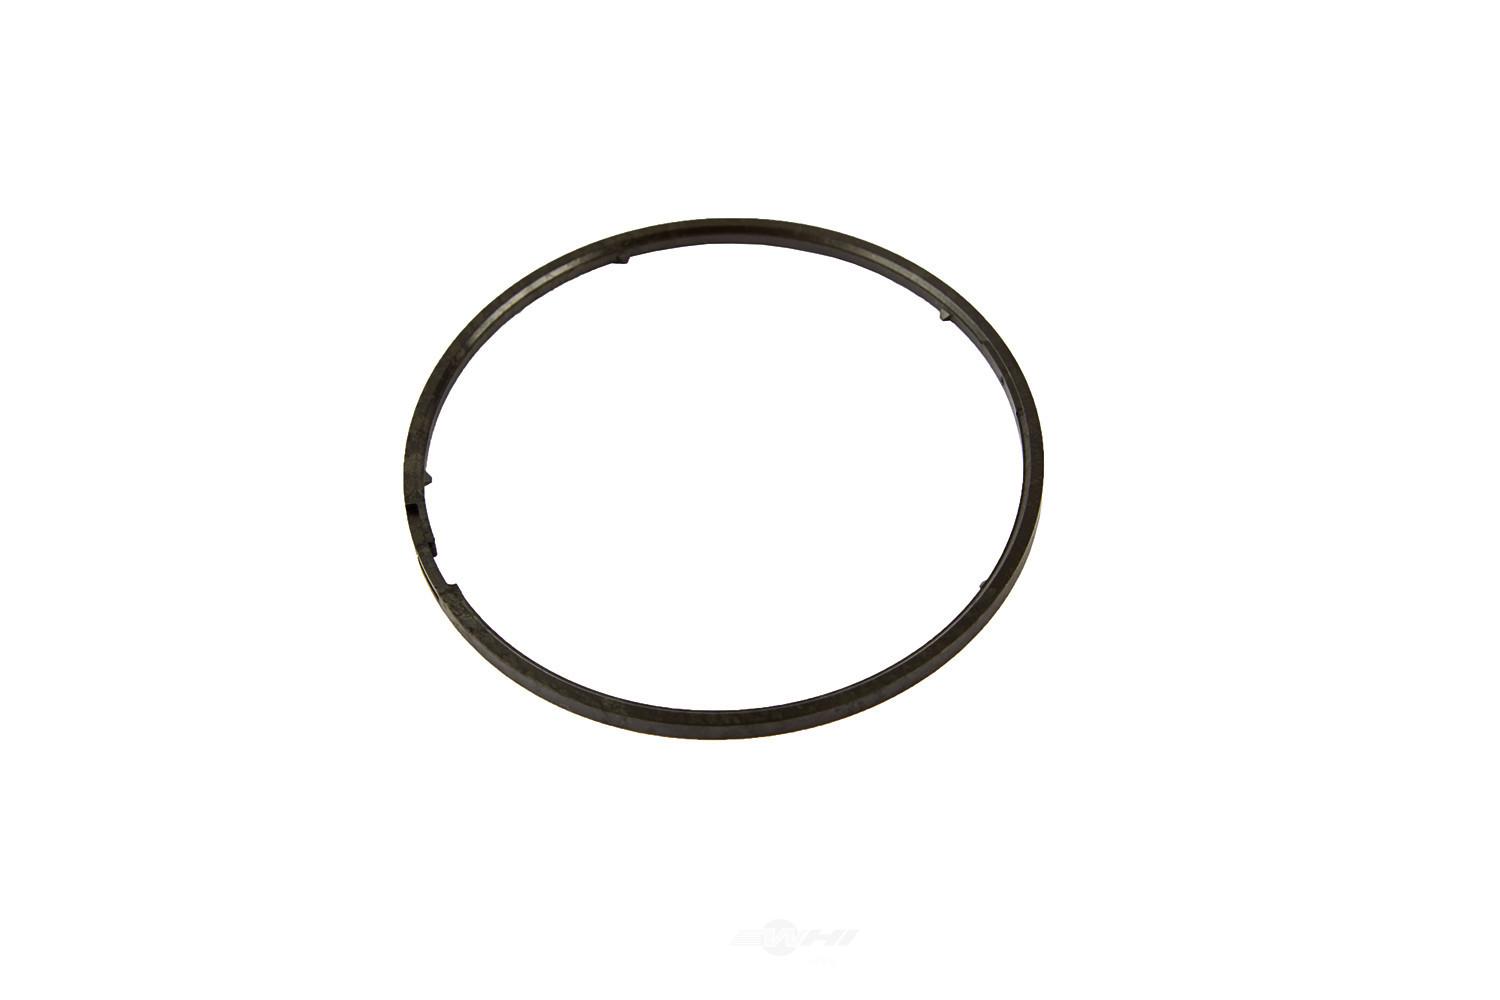 GM GENUINE PARTS - Automatic Transmission Clutch Housing Fluid Seal Ring (1-3-5-6-7) - GMP 24266593